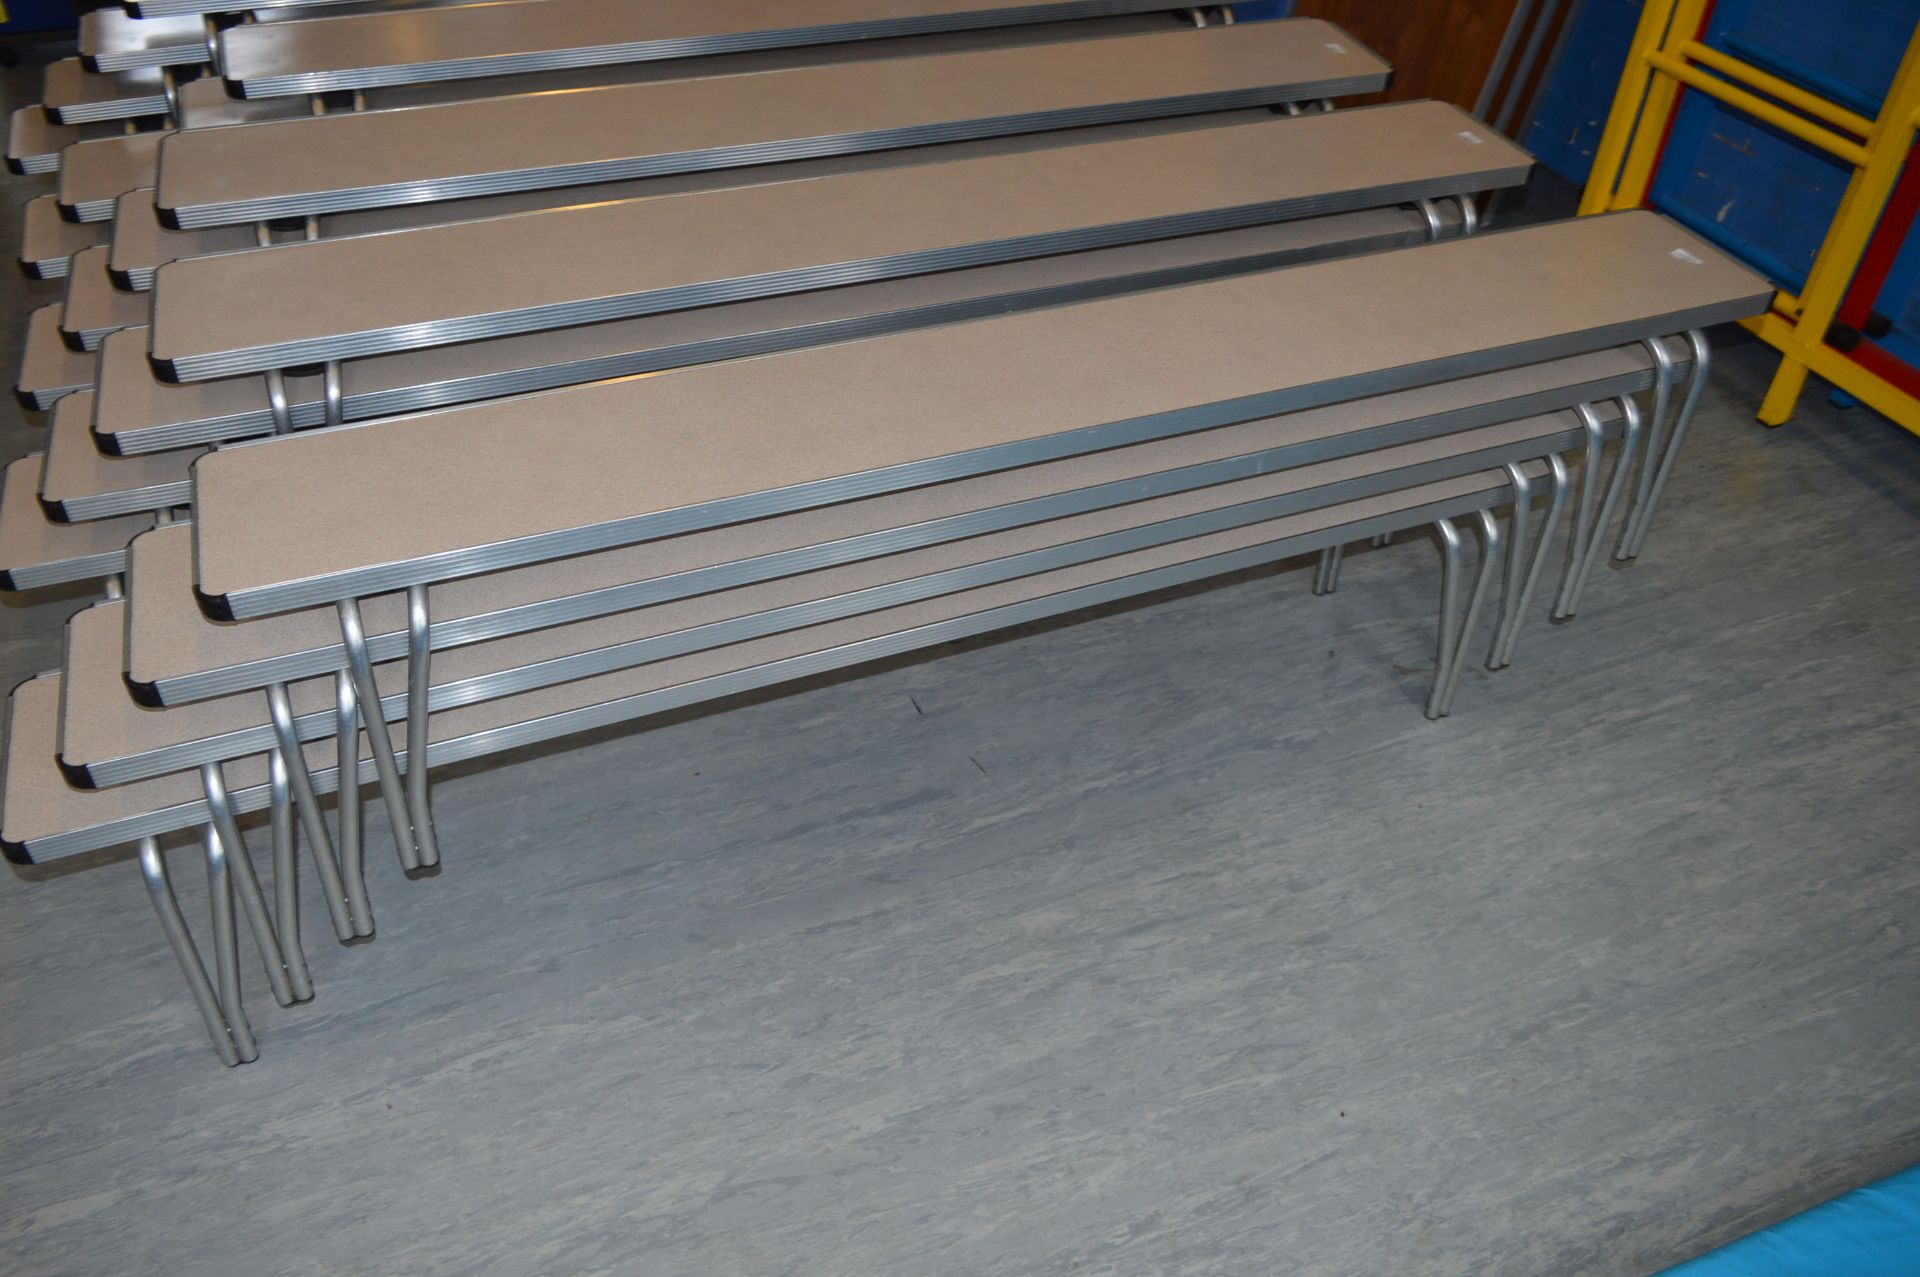 *Four Light Weight Aluminium Benches with Folding